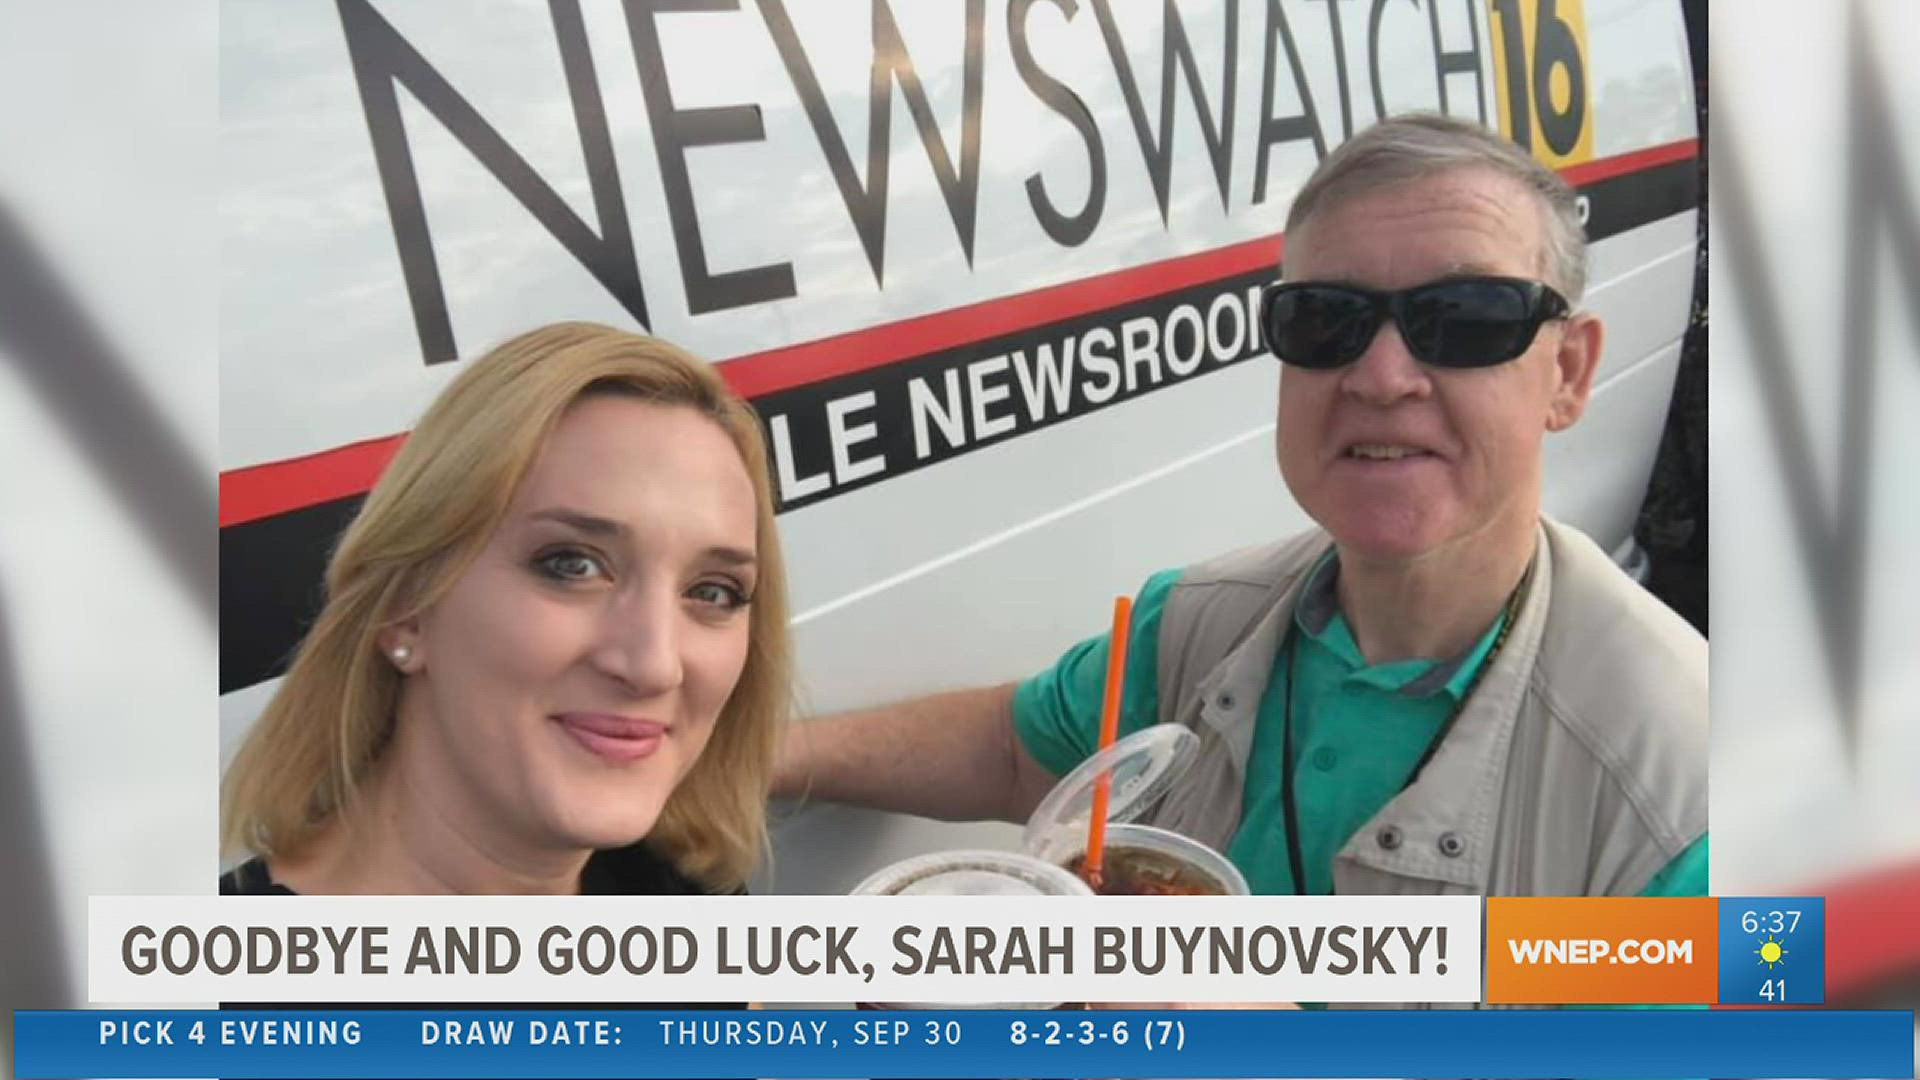 We're saying farewell to two members of our WNEP family.